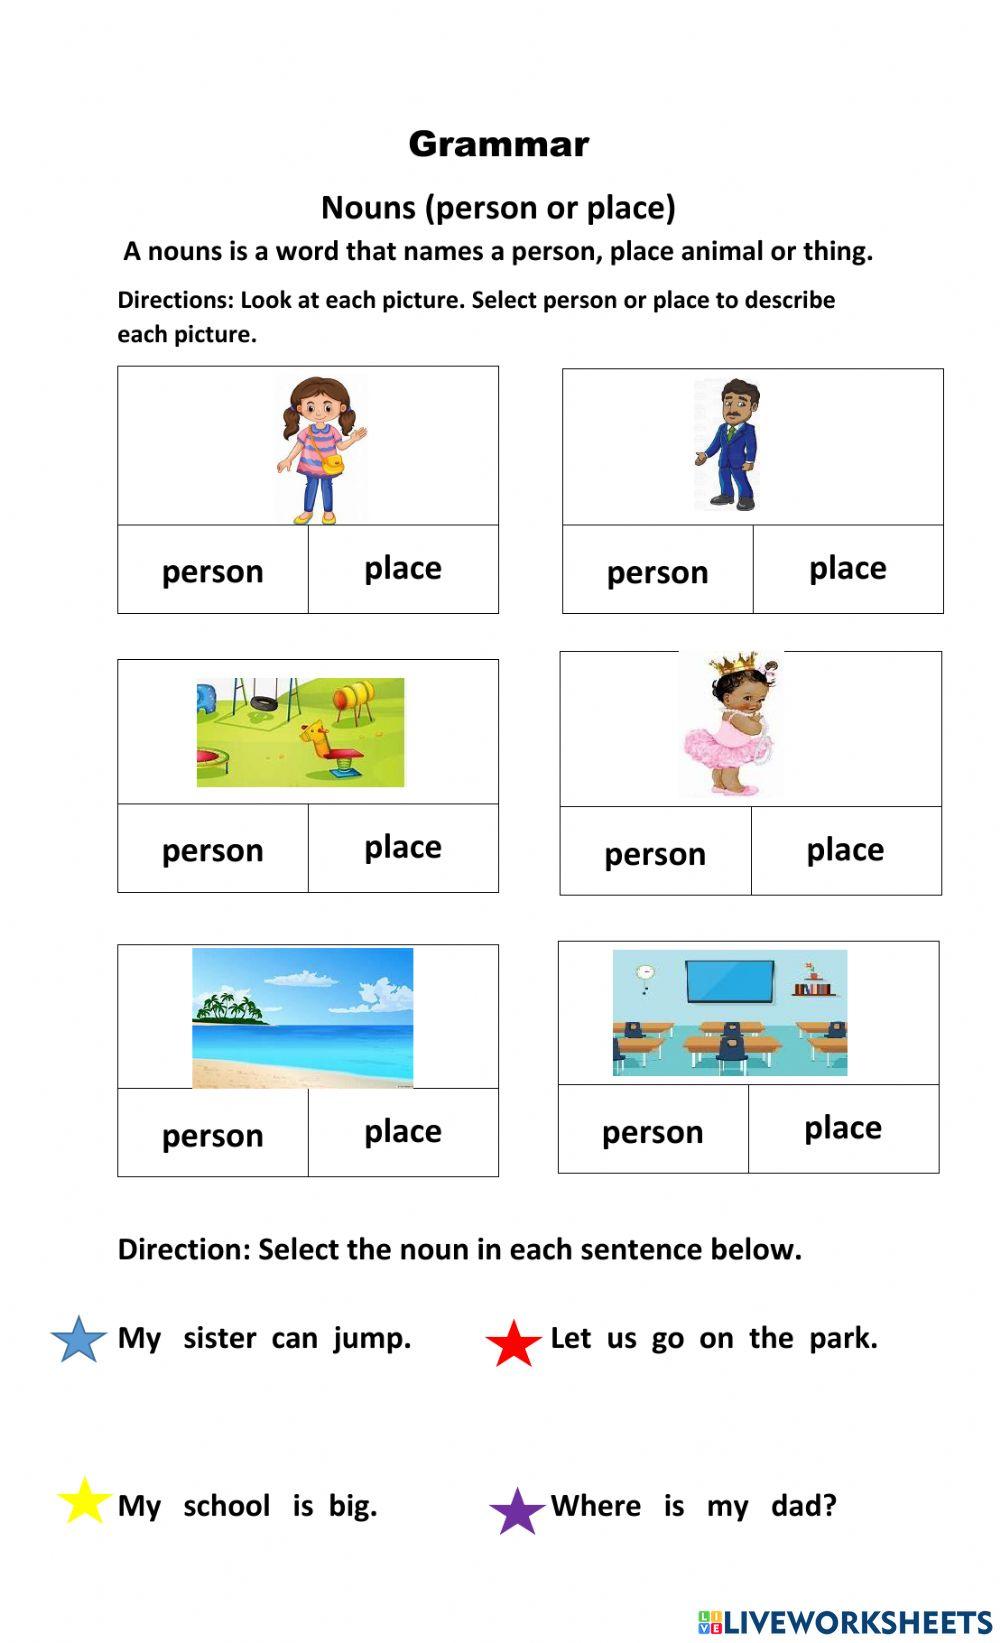 Nouns person and place